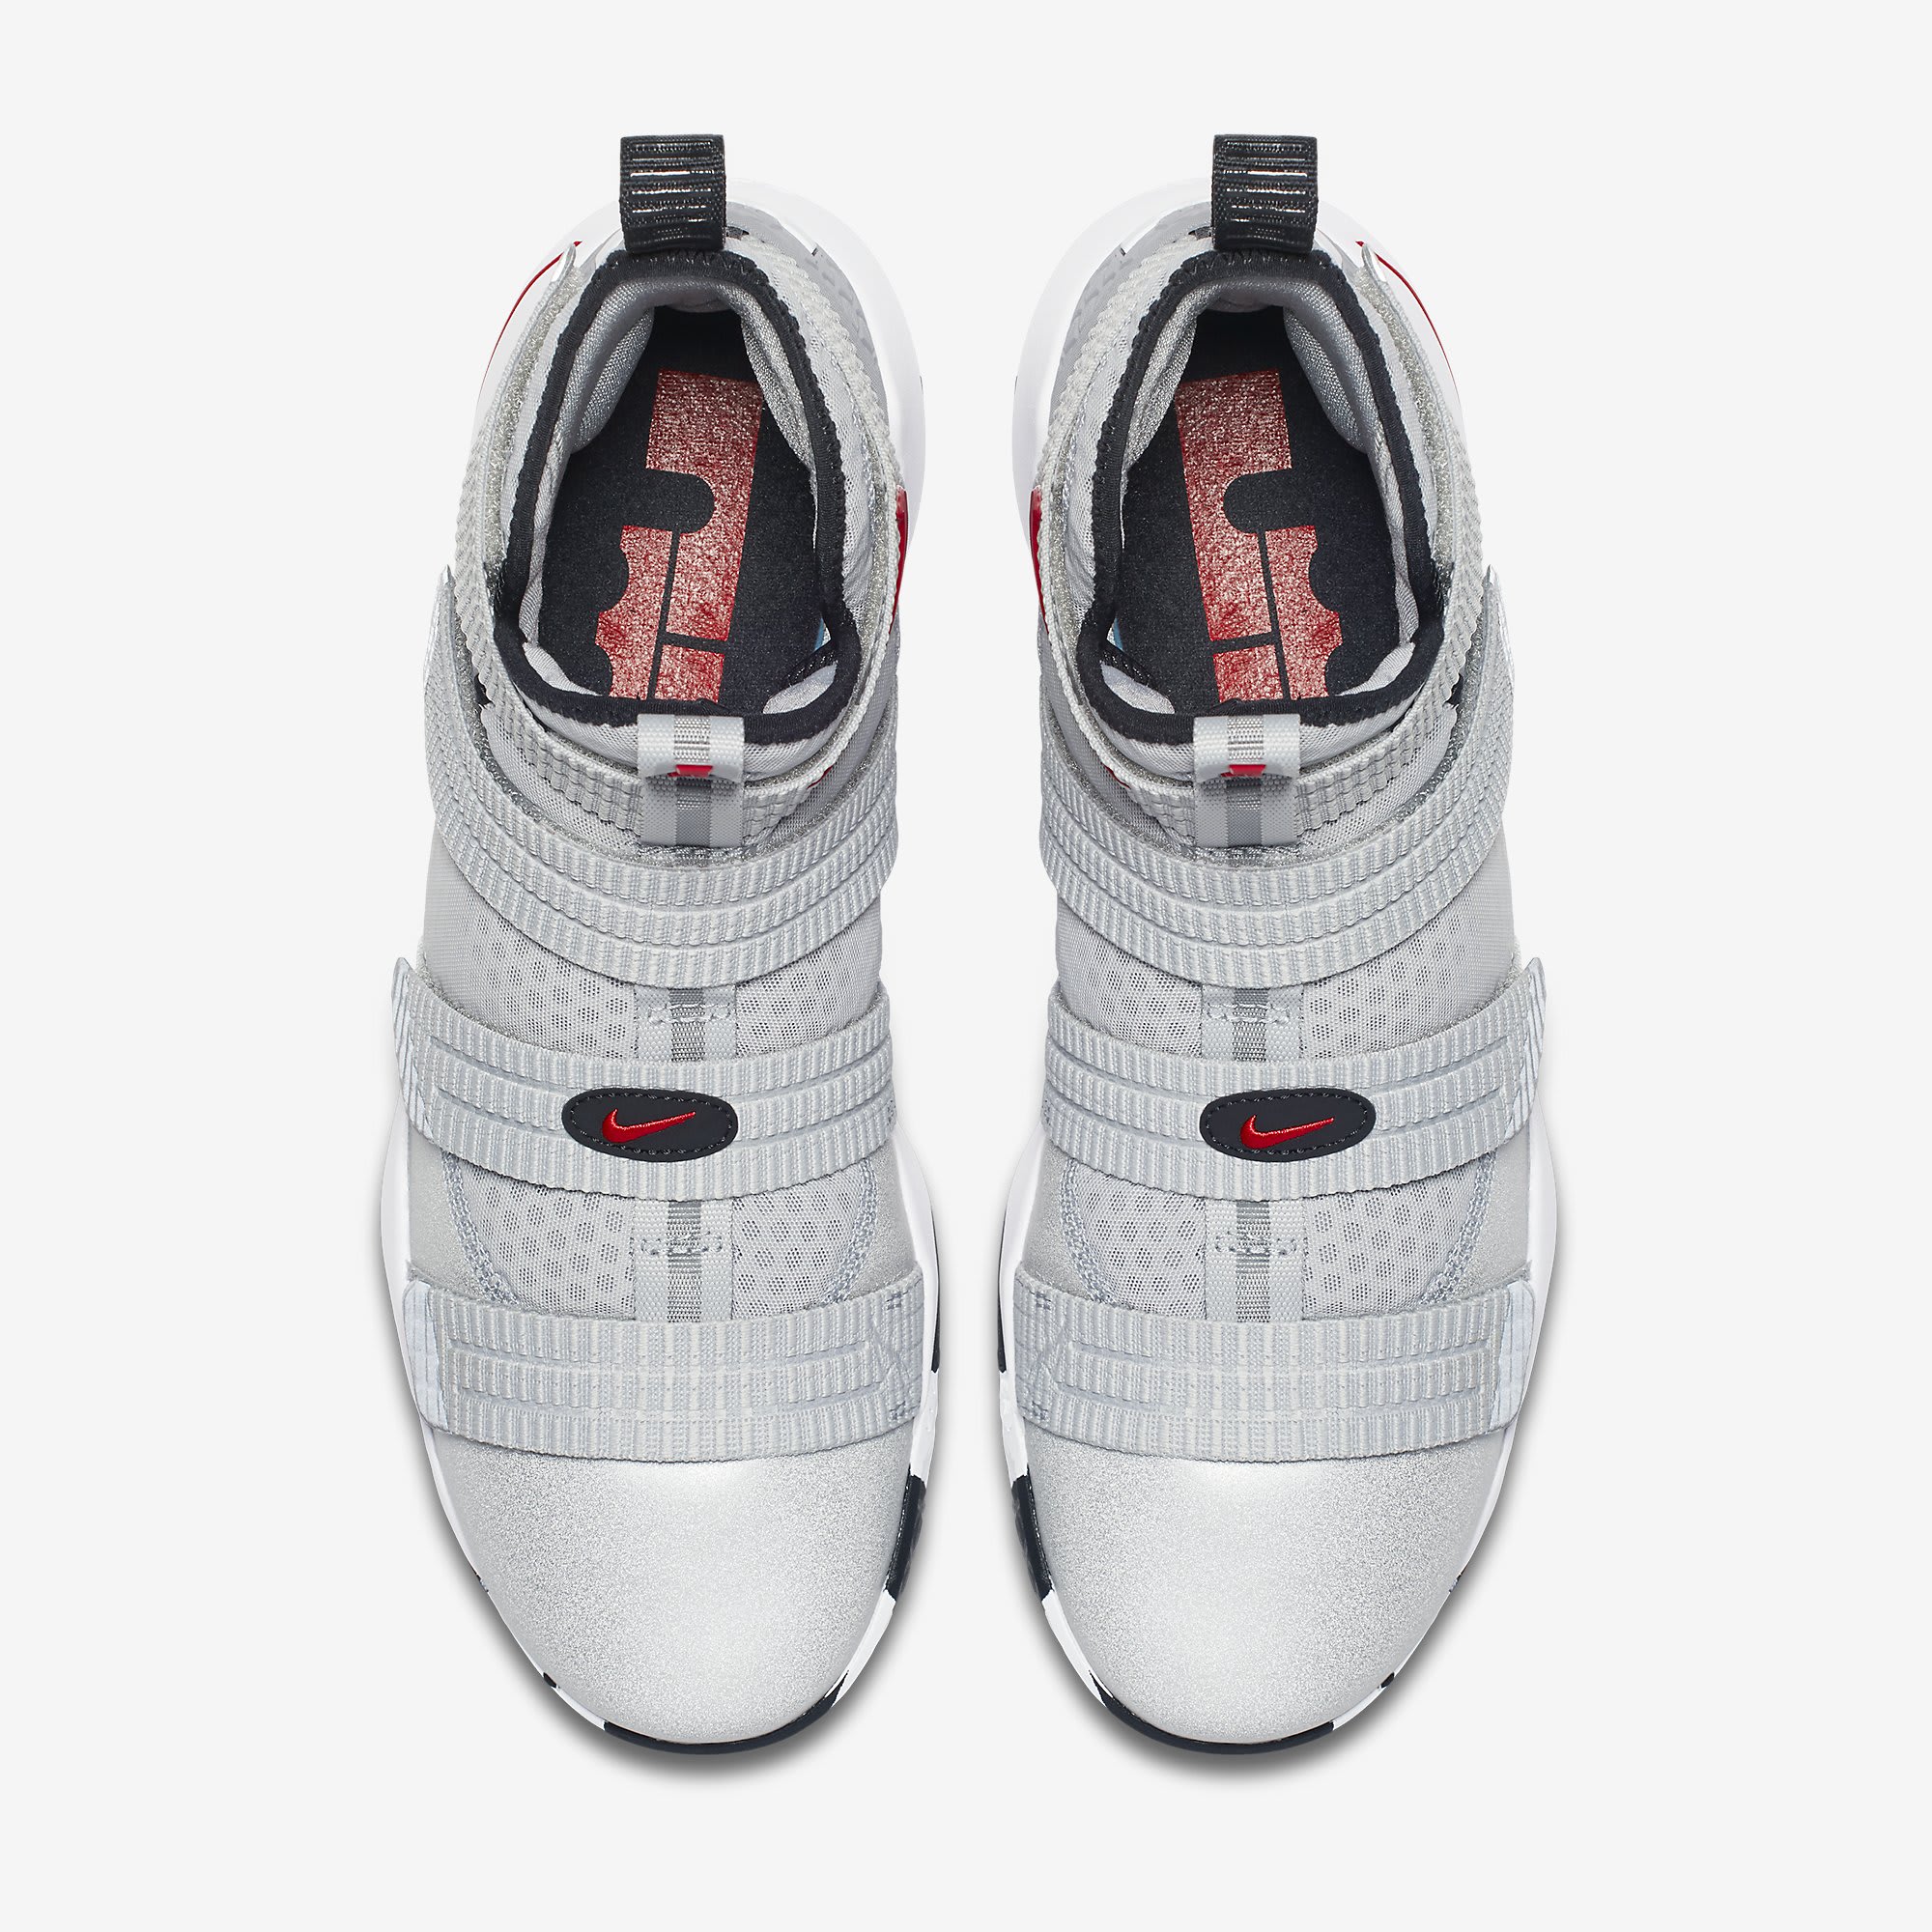 Silver Bullet Nike LeBron Soldier 11 897646-007 Top